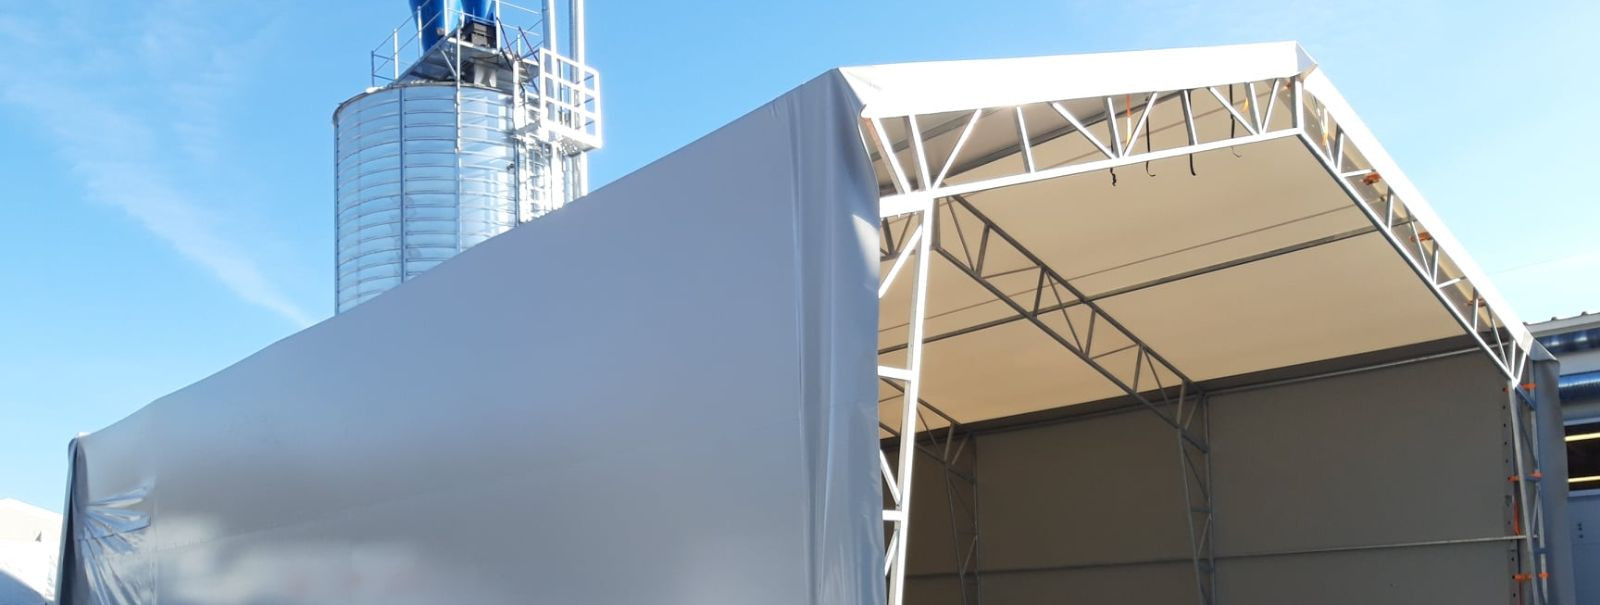 PVC halls, also known as fabric structures or tensioned membrane structures, are innovative storage solutions made from high-strength polyvinyl chloride (PVC) f